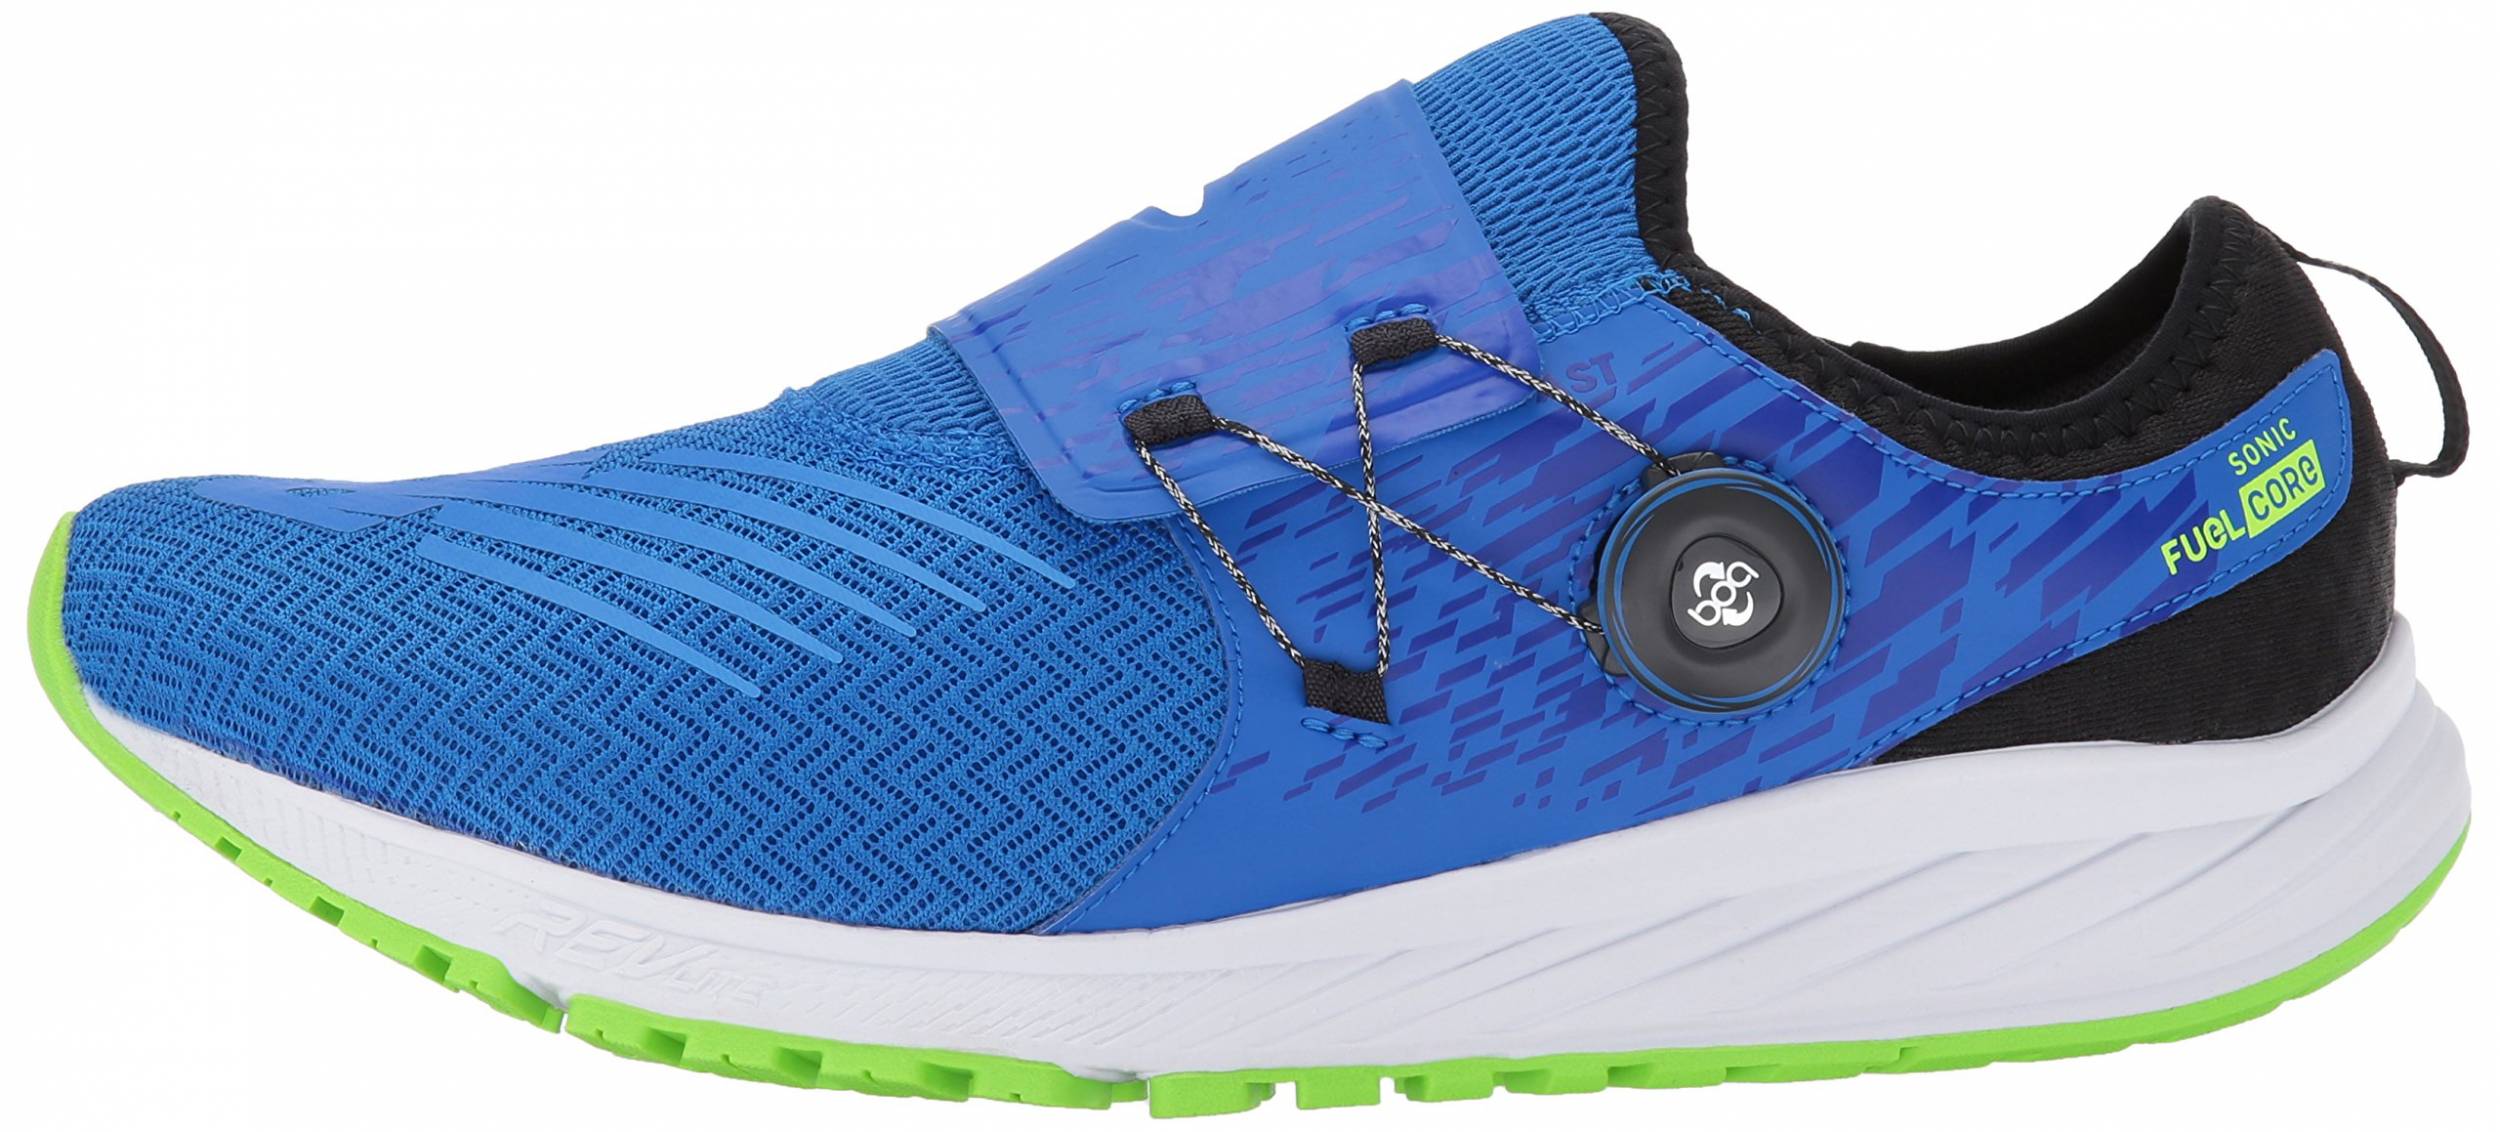 new balance sonic fuel core review